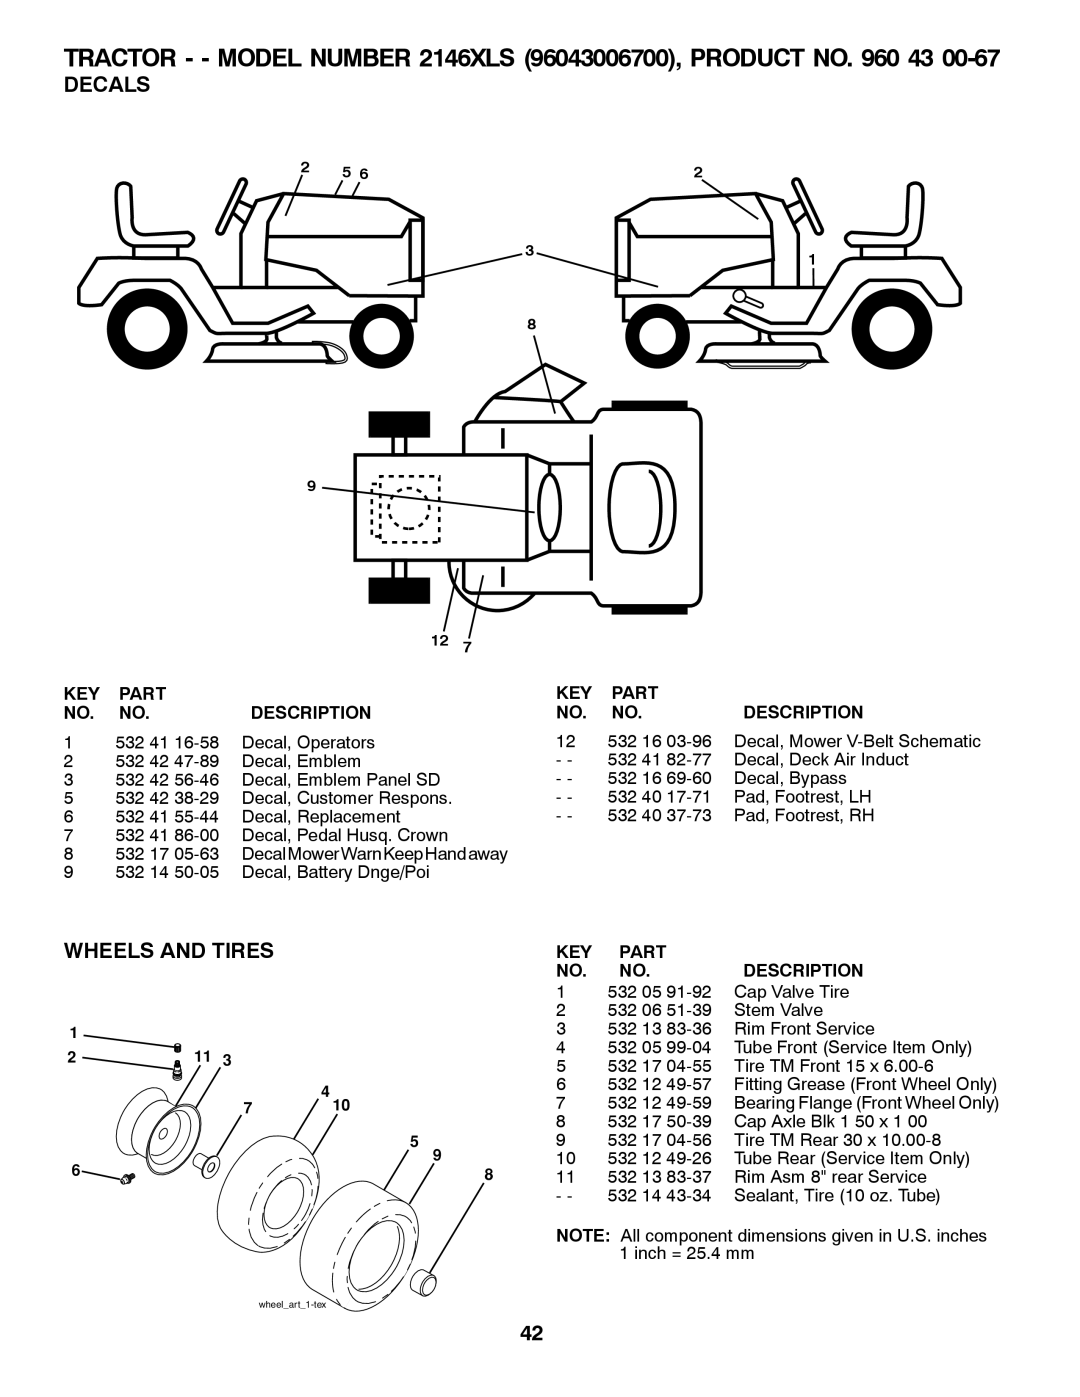 Husqvarna 2146XLS owner manual Decals, Wheels And Tires 